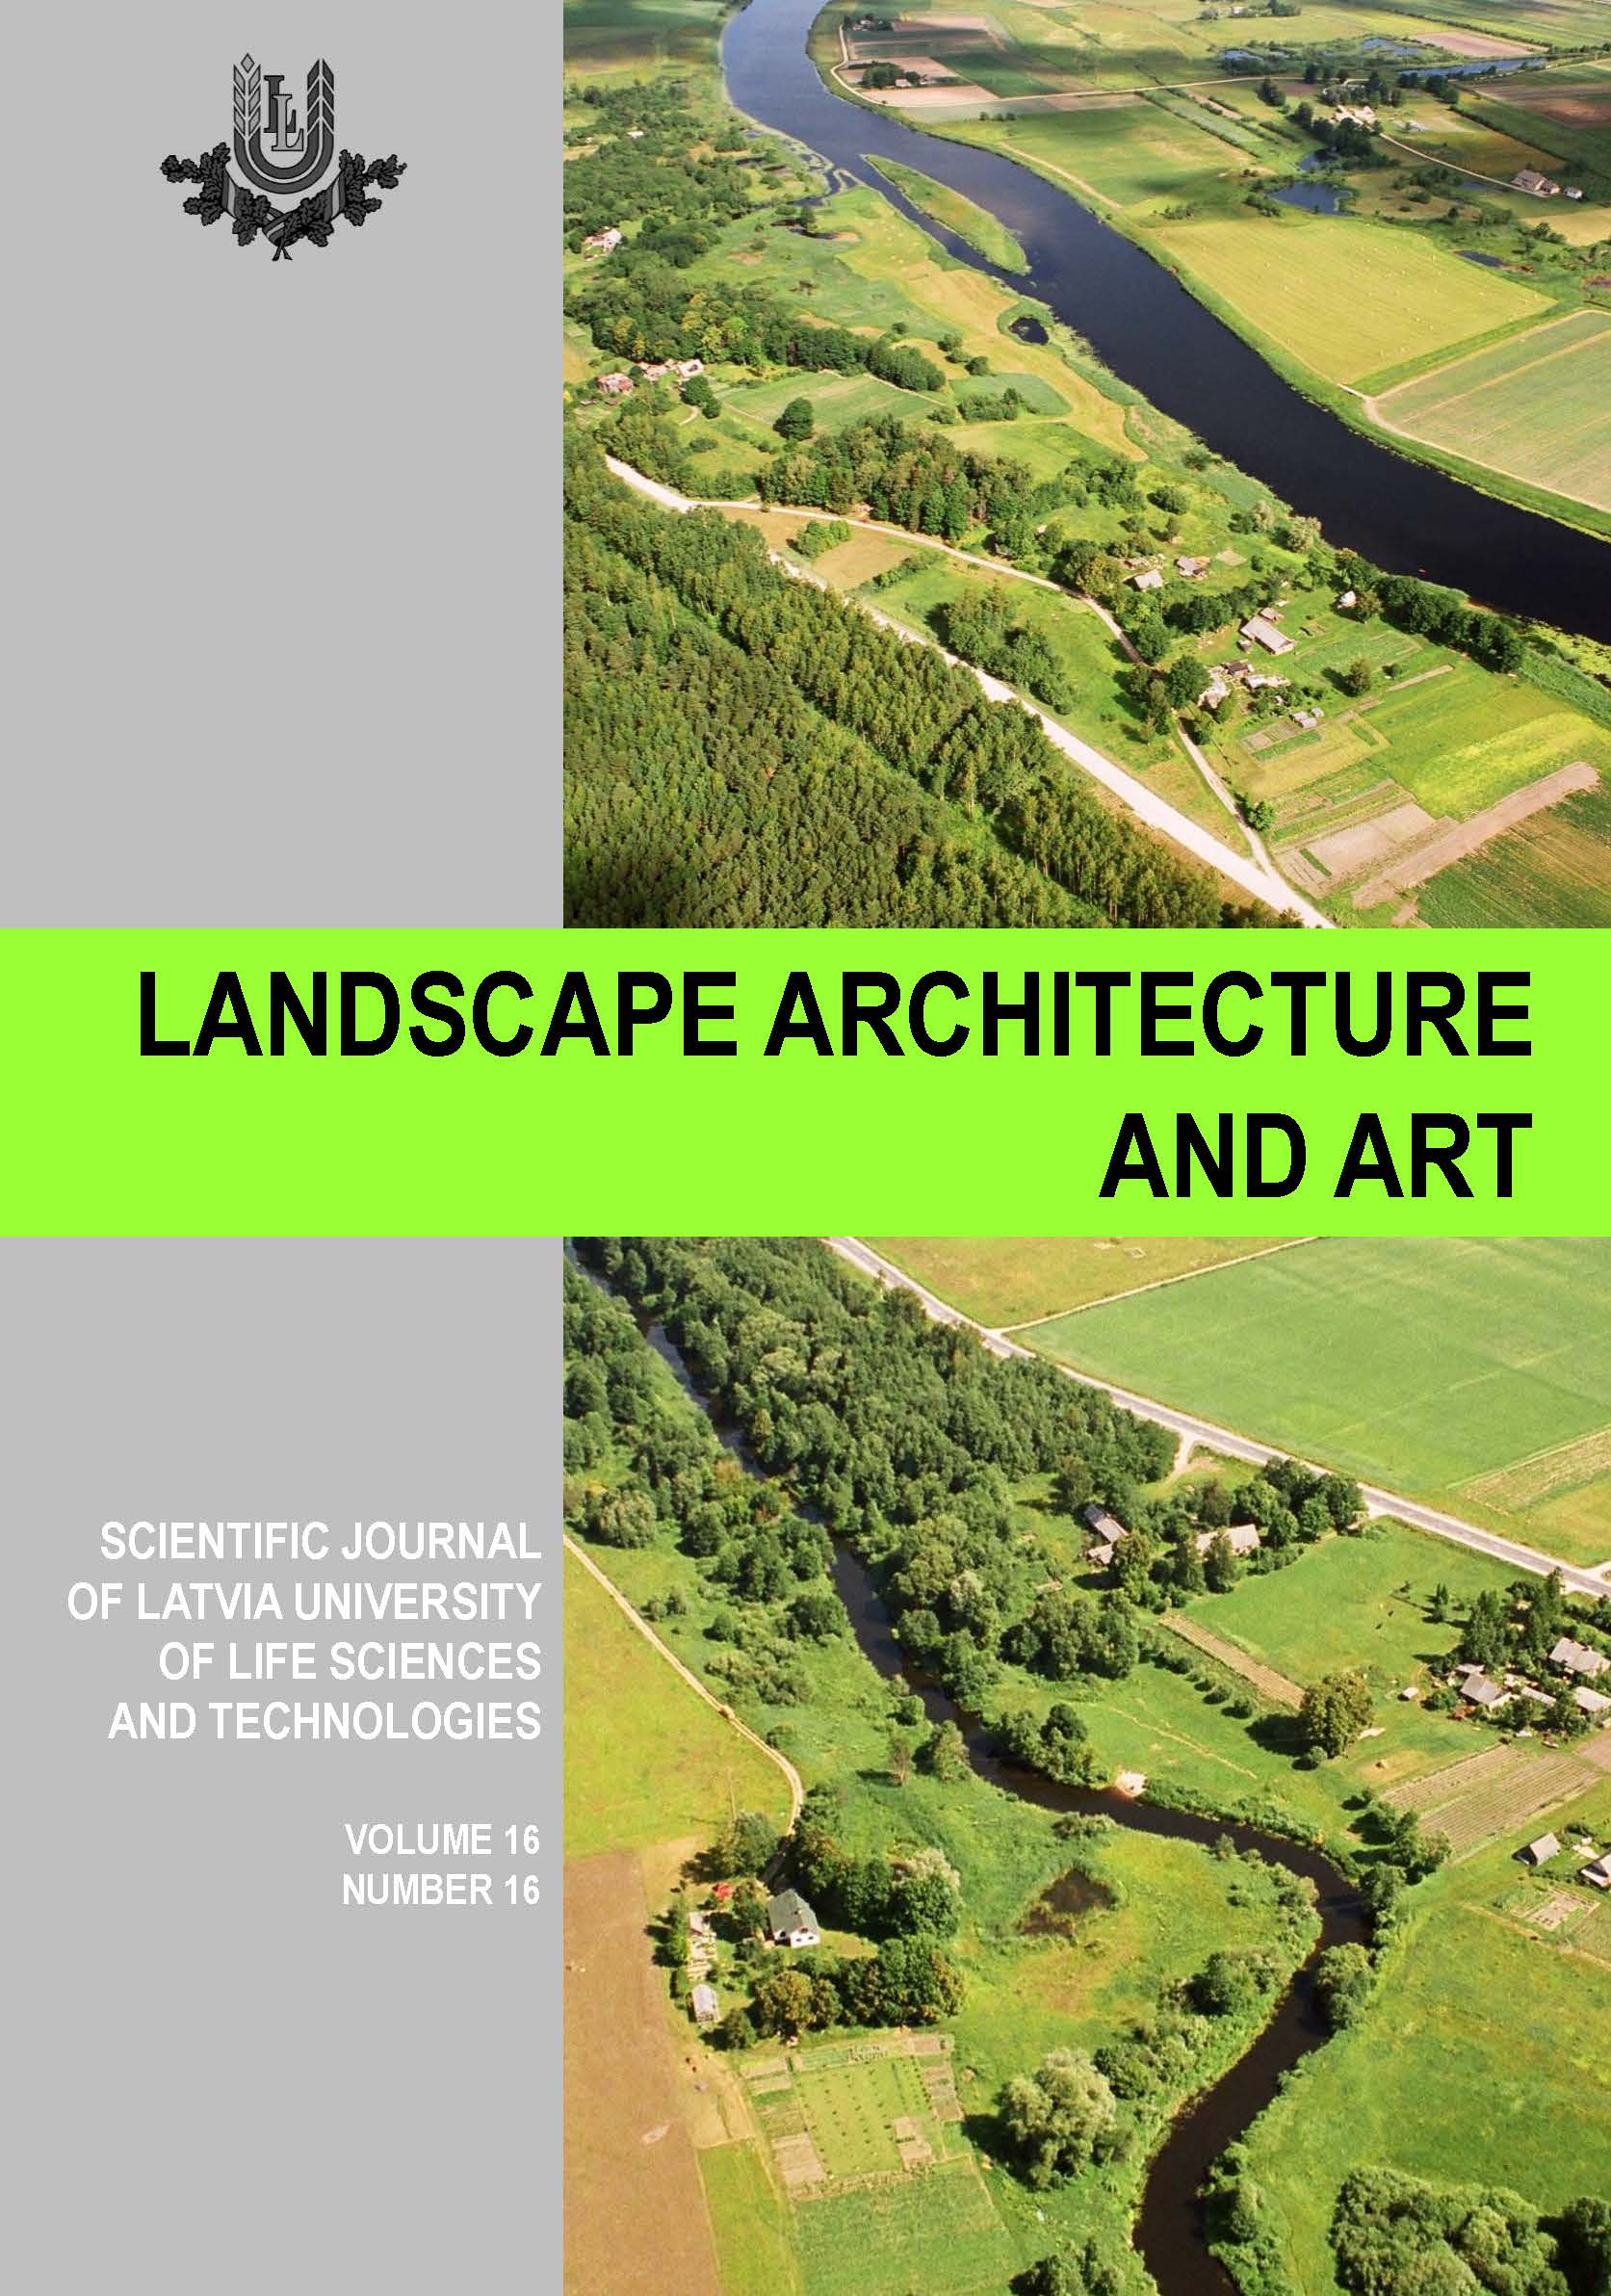 Landscape Architecture and Art, Volume 16, Number 16